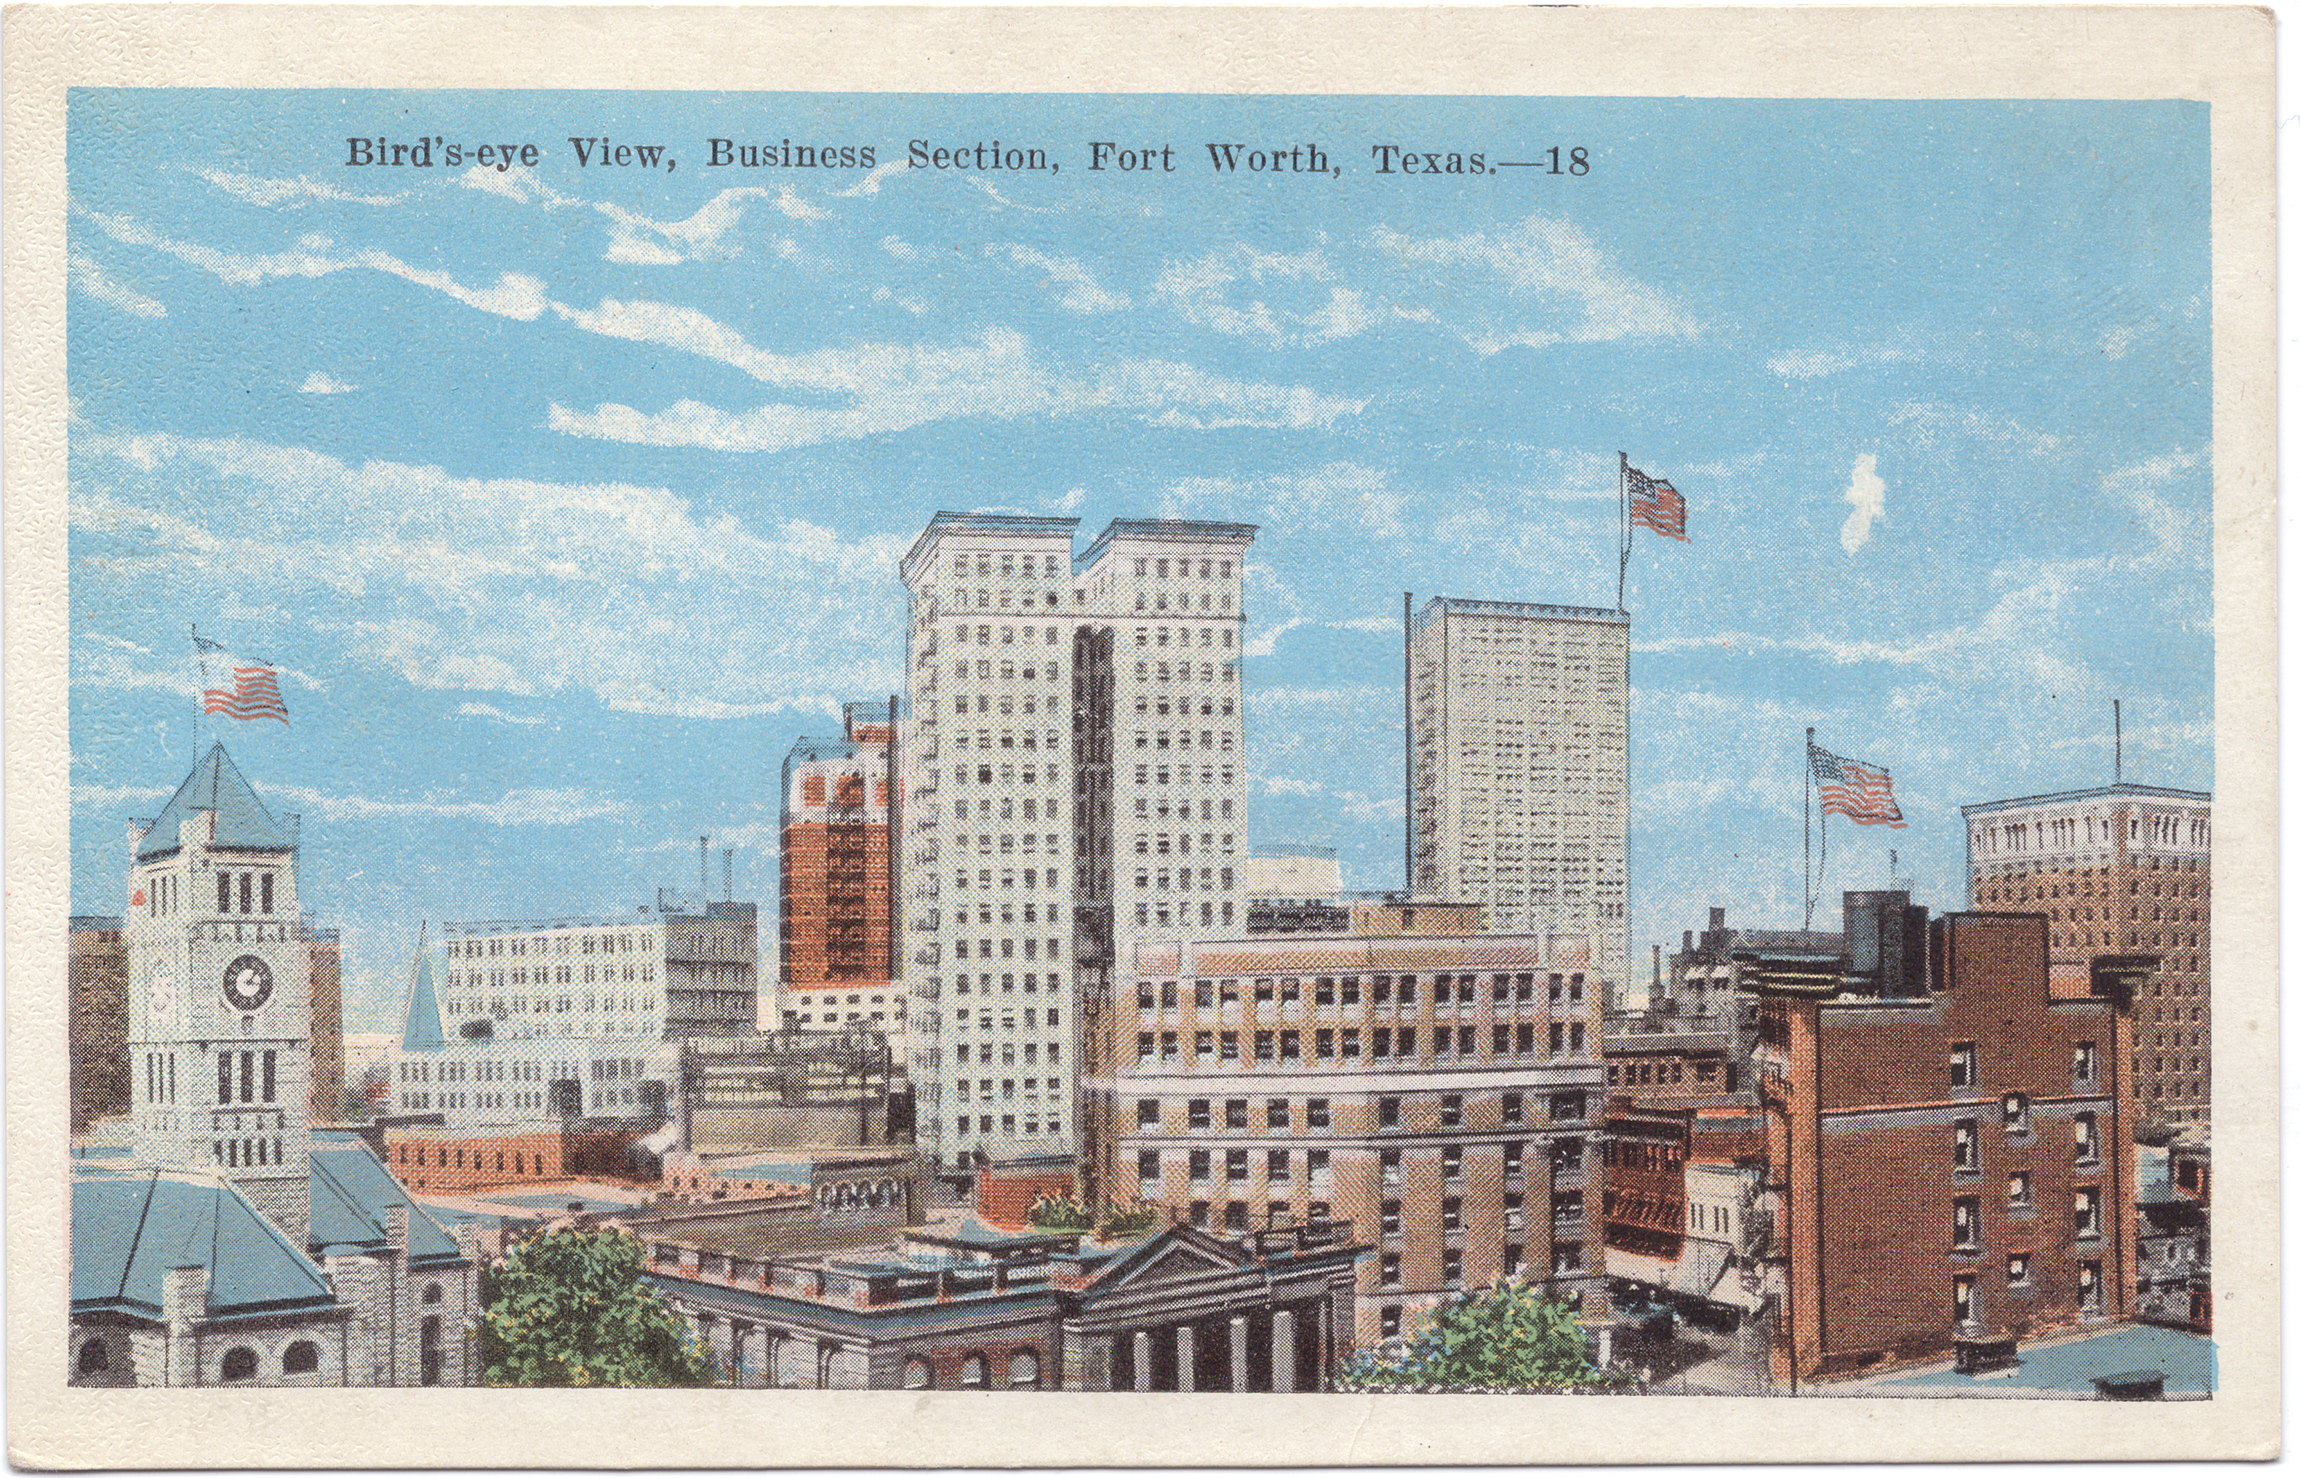 The postcard features a drawing of a large collection of buildings.